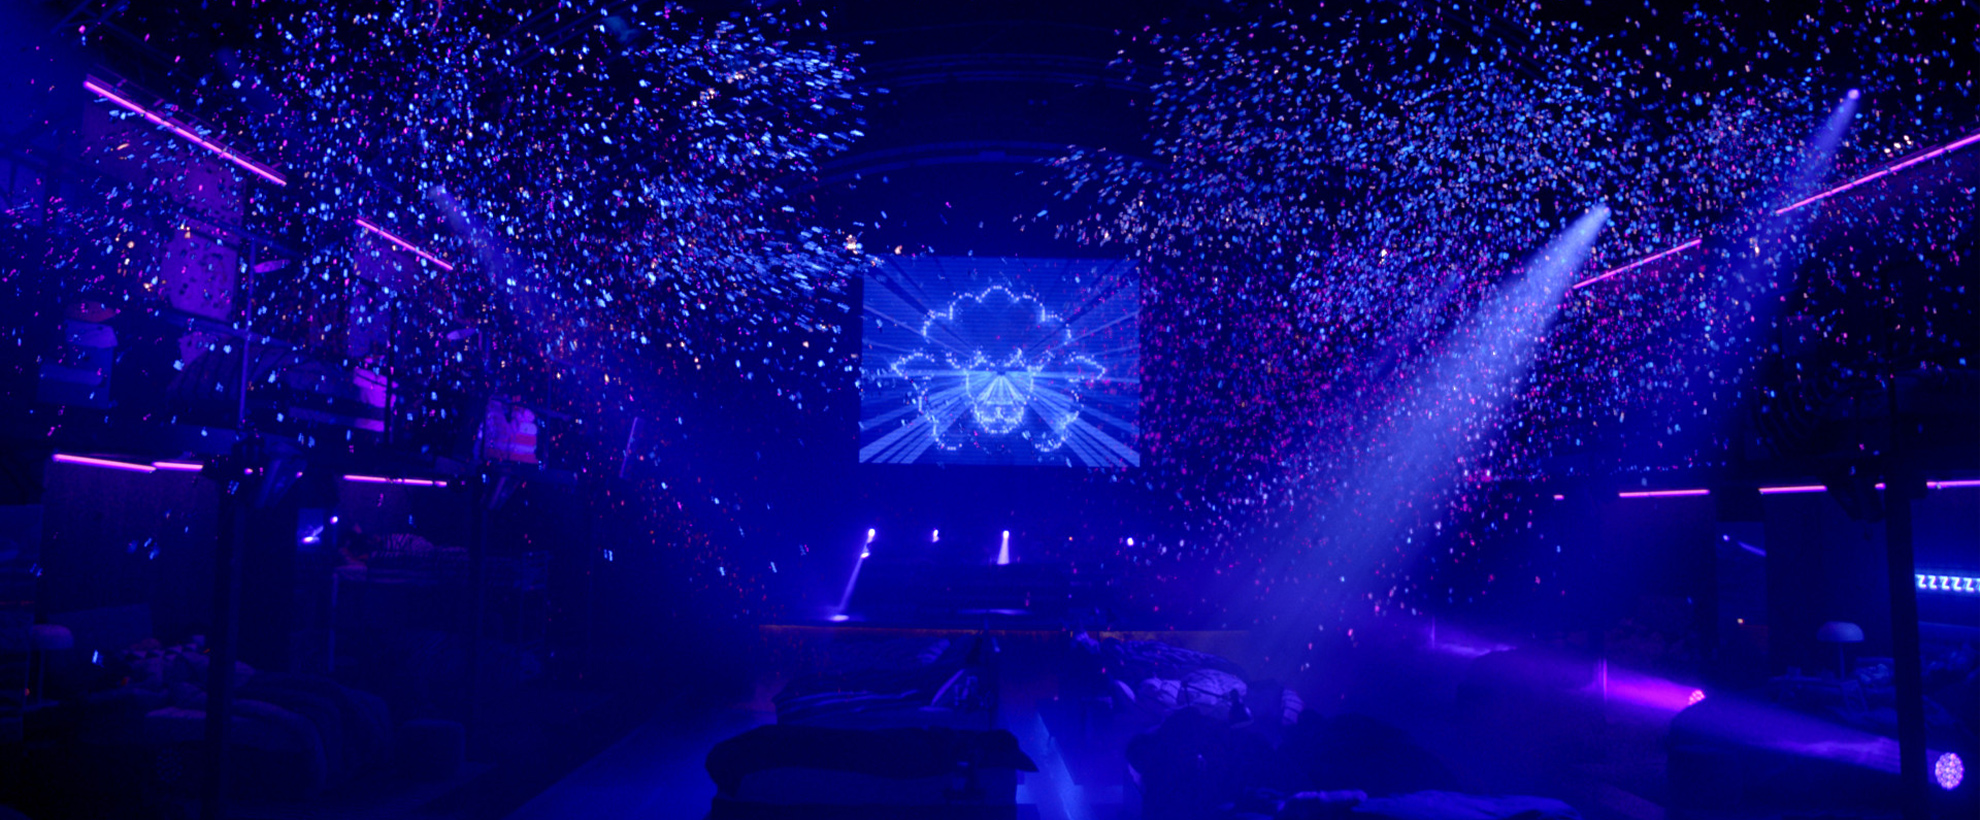 Blue and purple night club with confetti falling from the ceiling